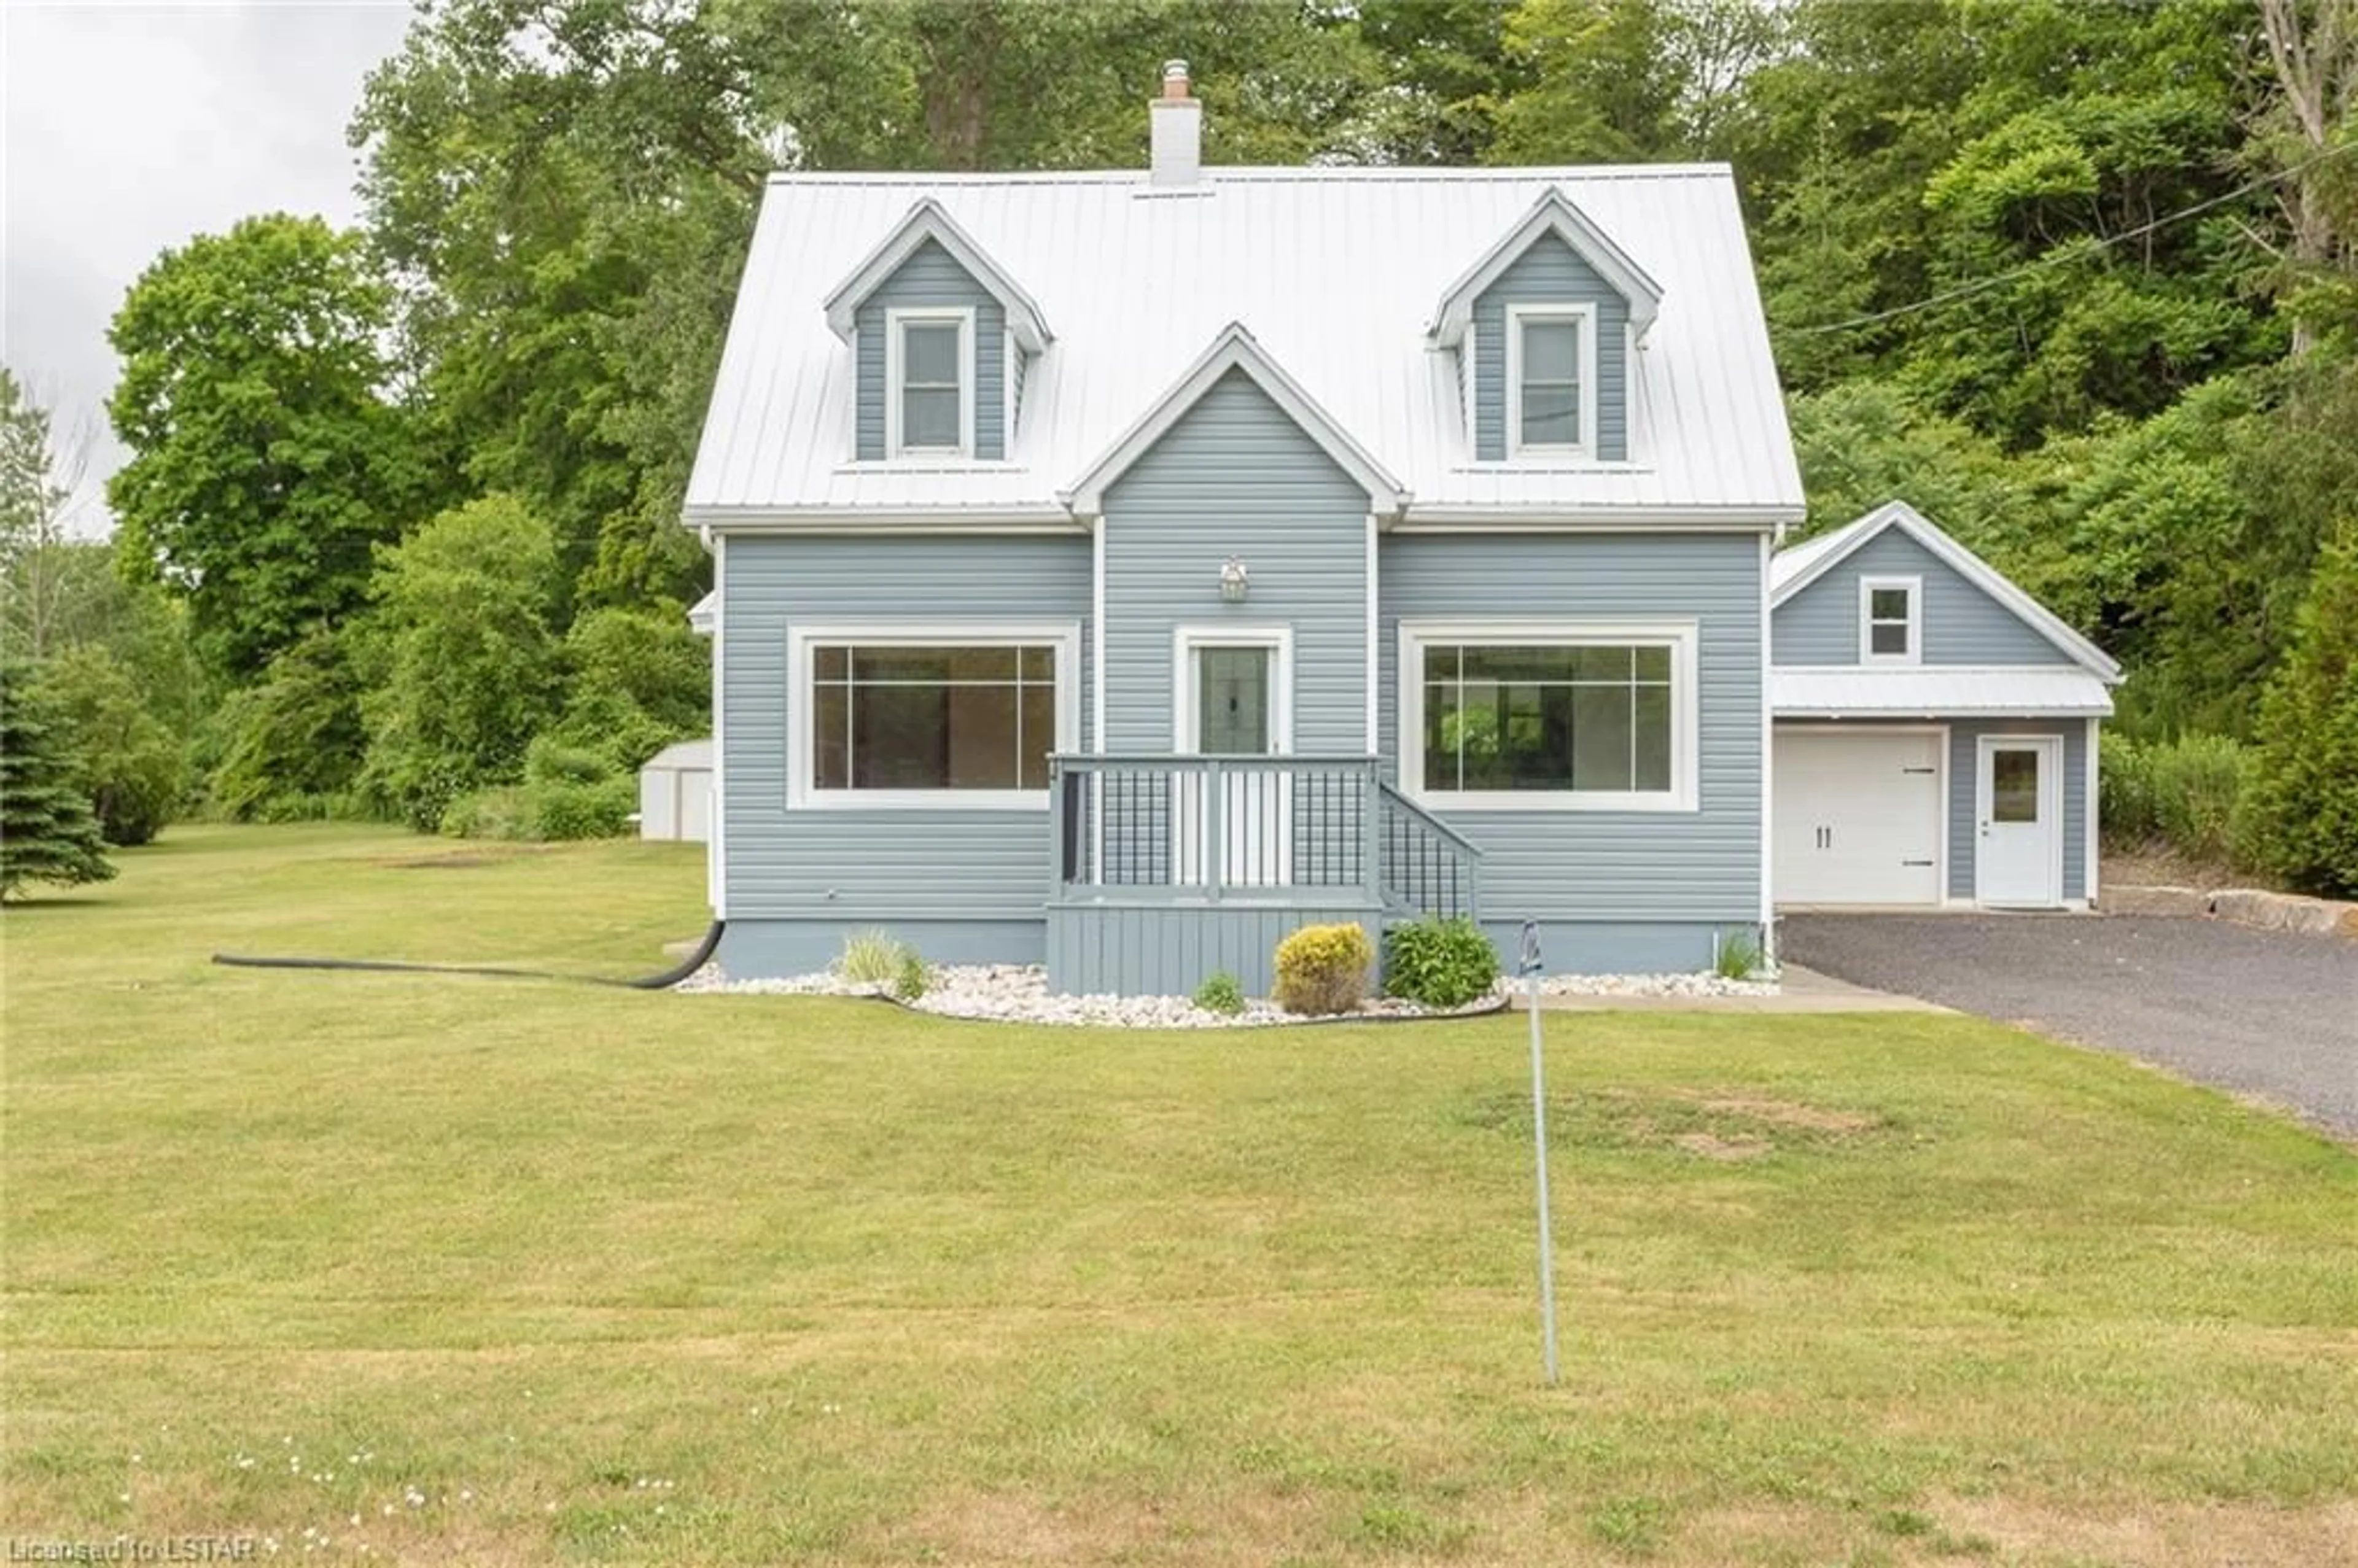 Cottage for 4025 Union Rd, Southwold Ontario N5L 1J2